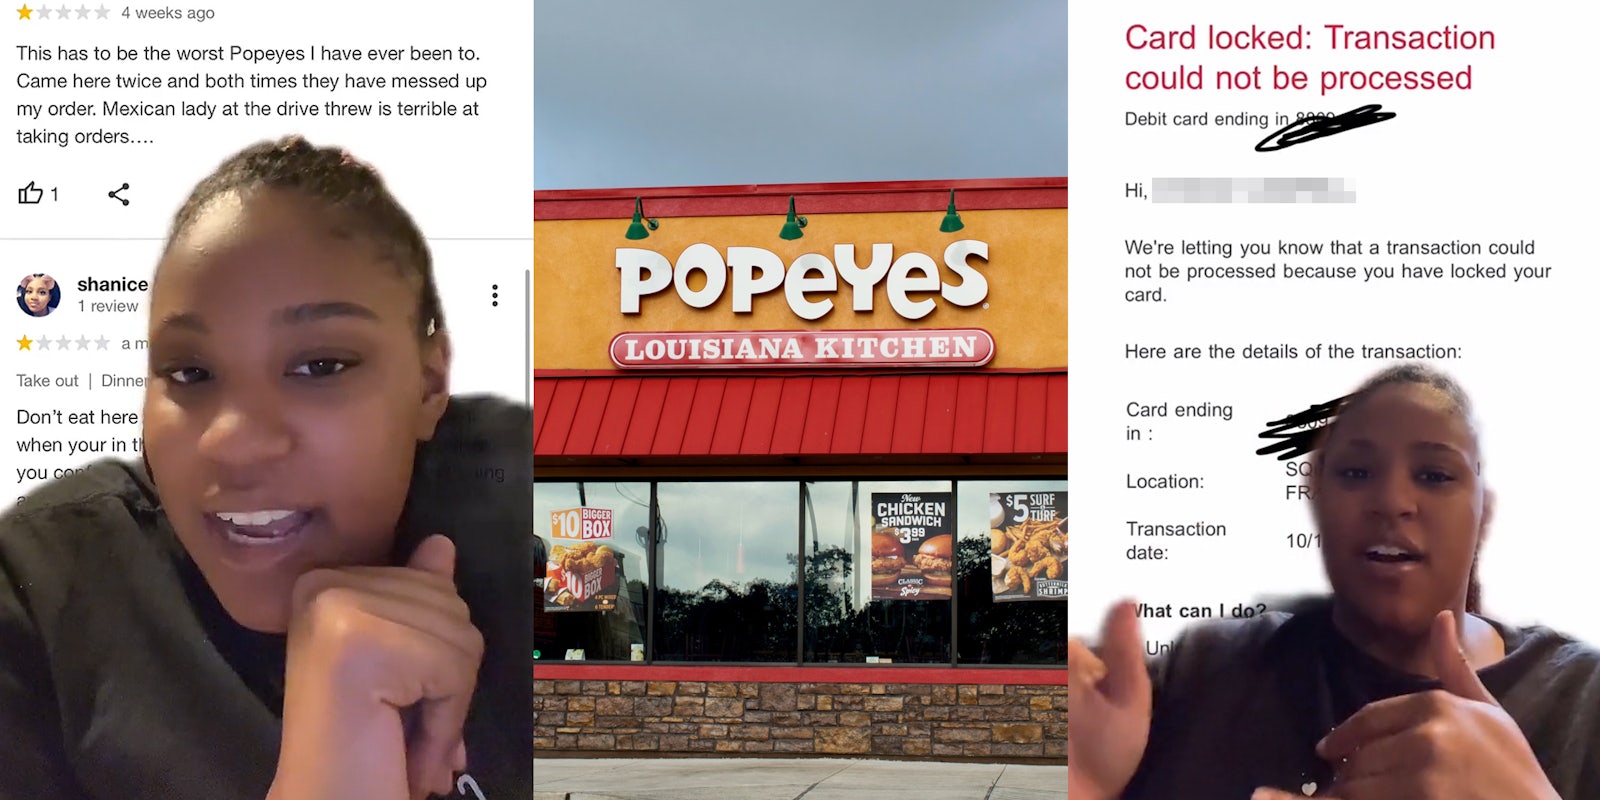 woman greenscreen TikTok over reviews of Popeyes (l) Popeyes building with sign (c) woman greenscreen TikTok over 'Card Locked: Transaction could not be processed' (r)